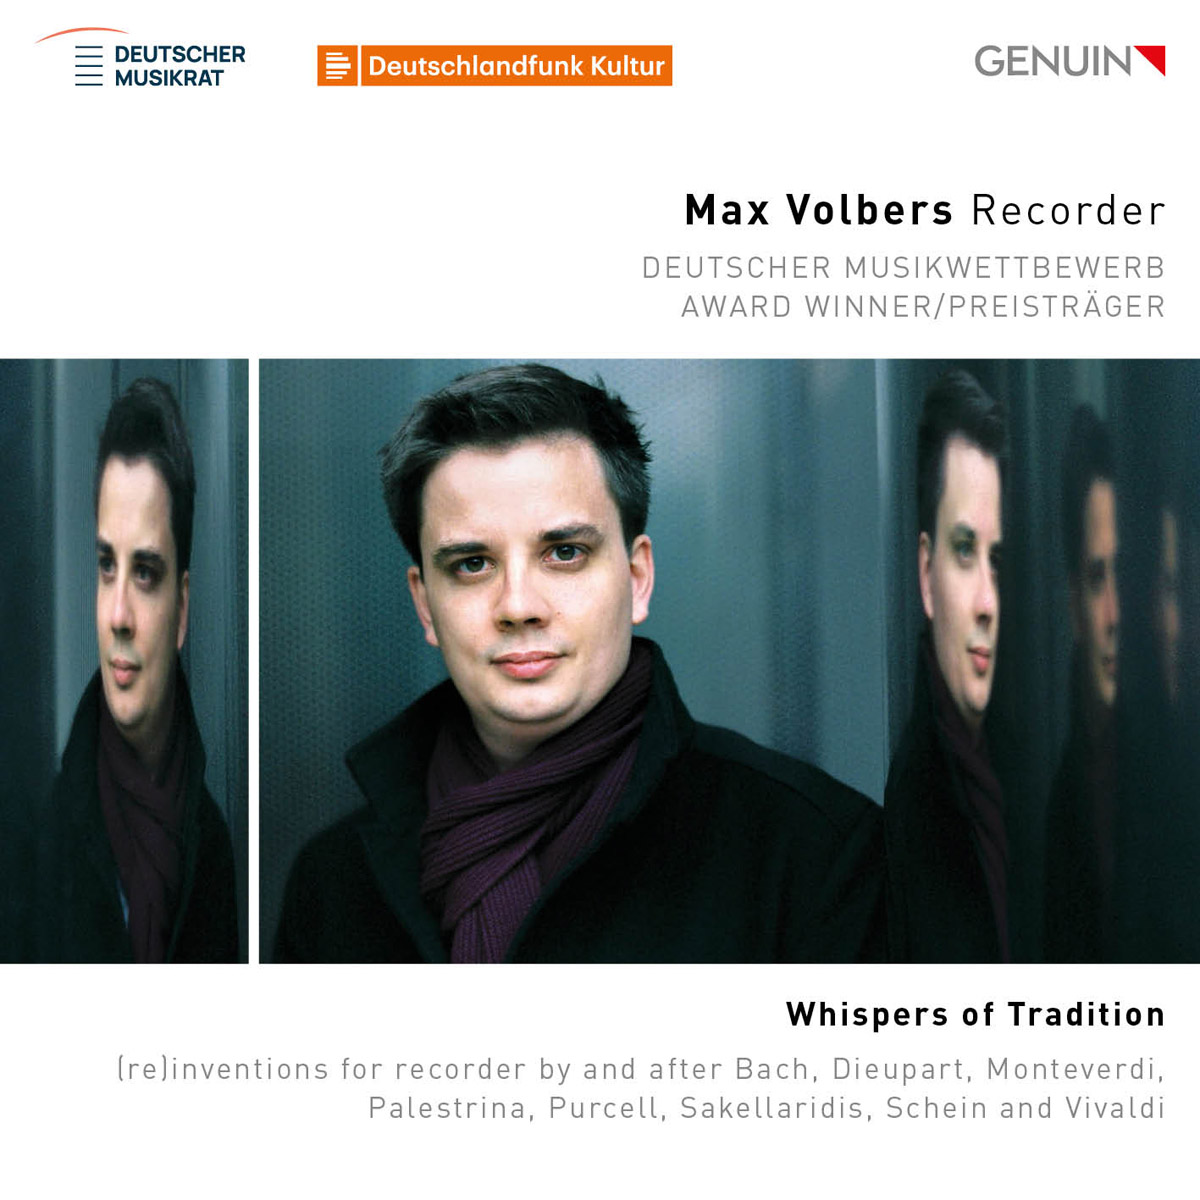 CD album cover 'Whispers of Tradition' (GEN 22804) with Max Volbers, Gäste / Guest Artists